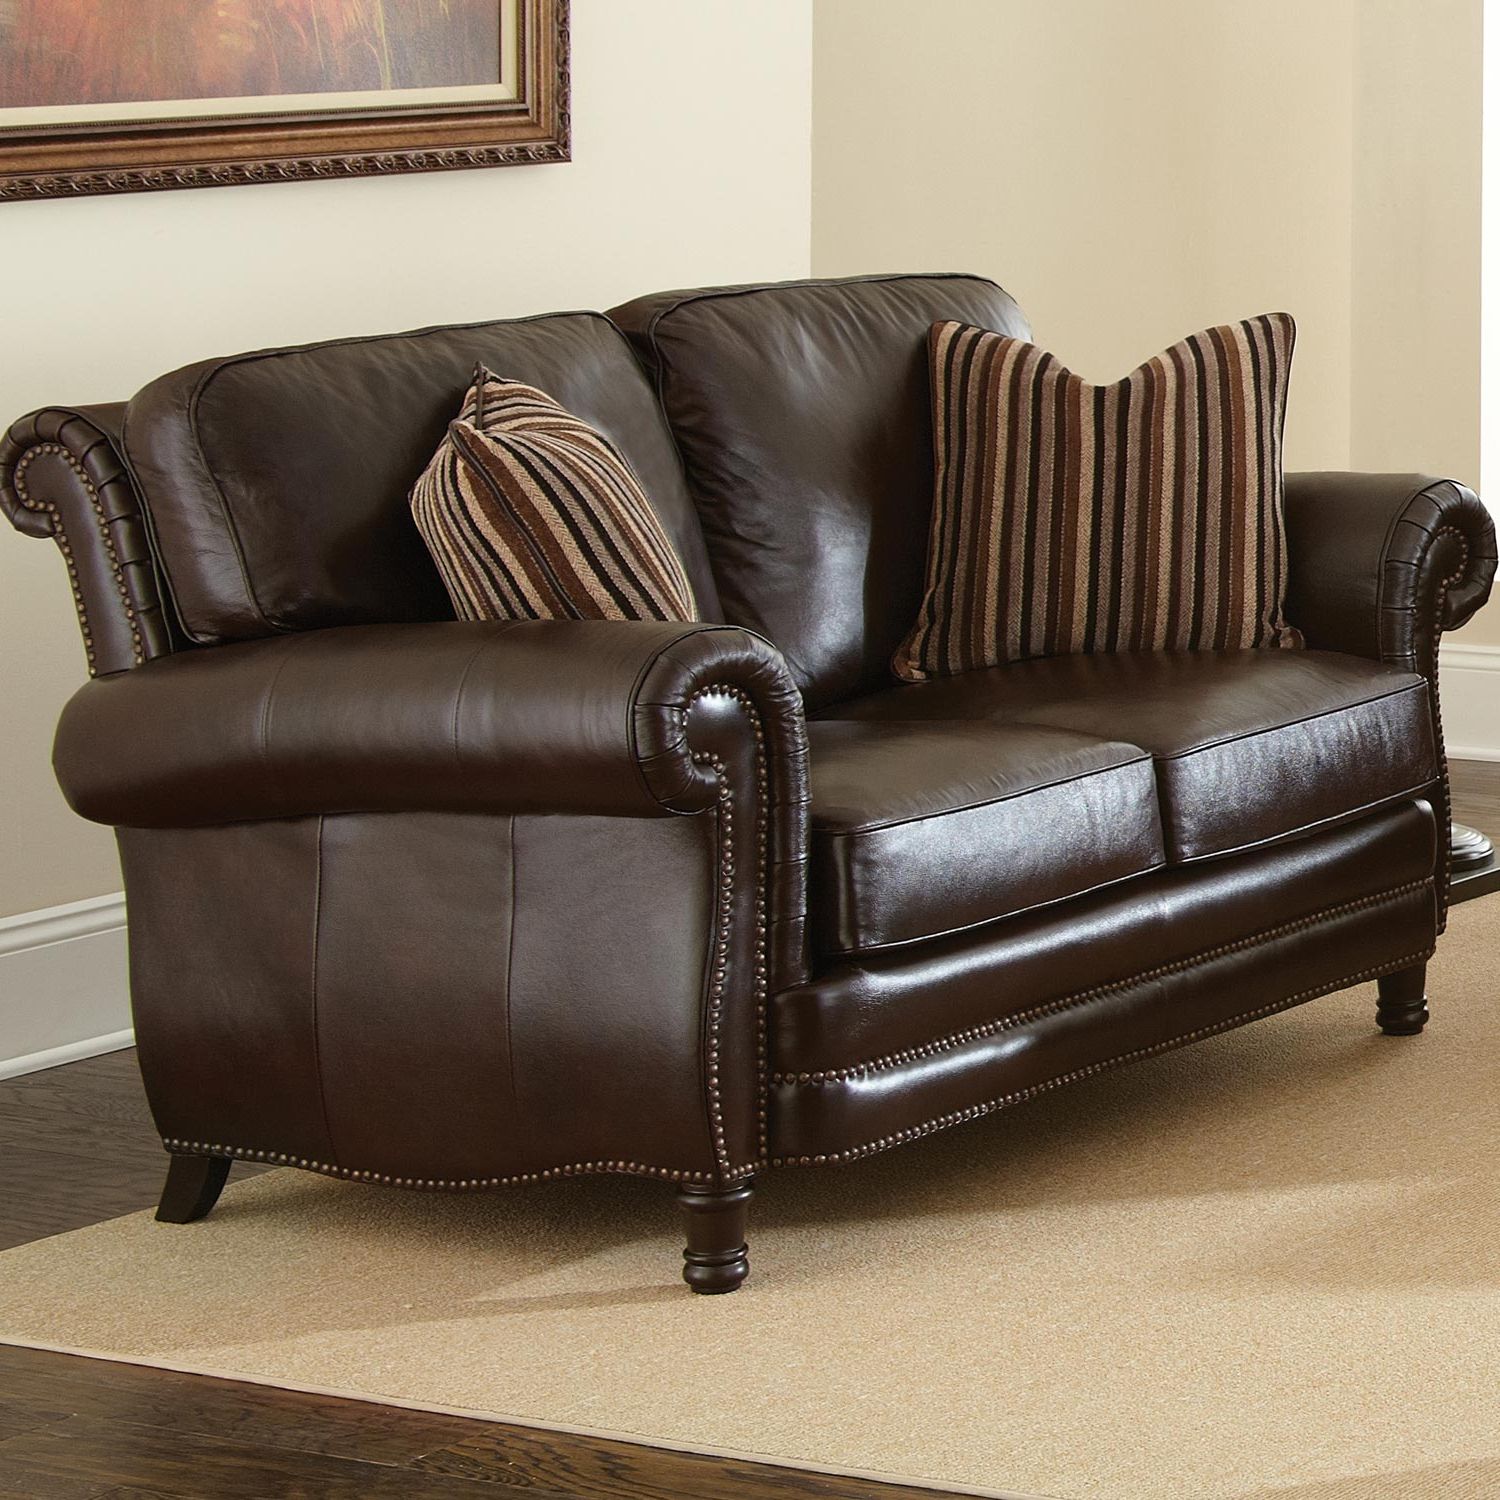 Chateau 3 Piece Leather Sofa Set – Antique Chocolate Brown | Dcg Stores Throughout Sofas In Chocolate Brown (Gallery 1 of 20)